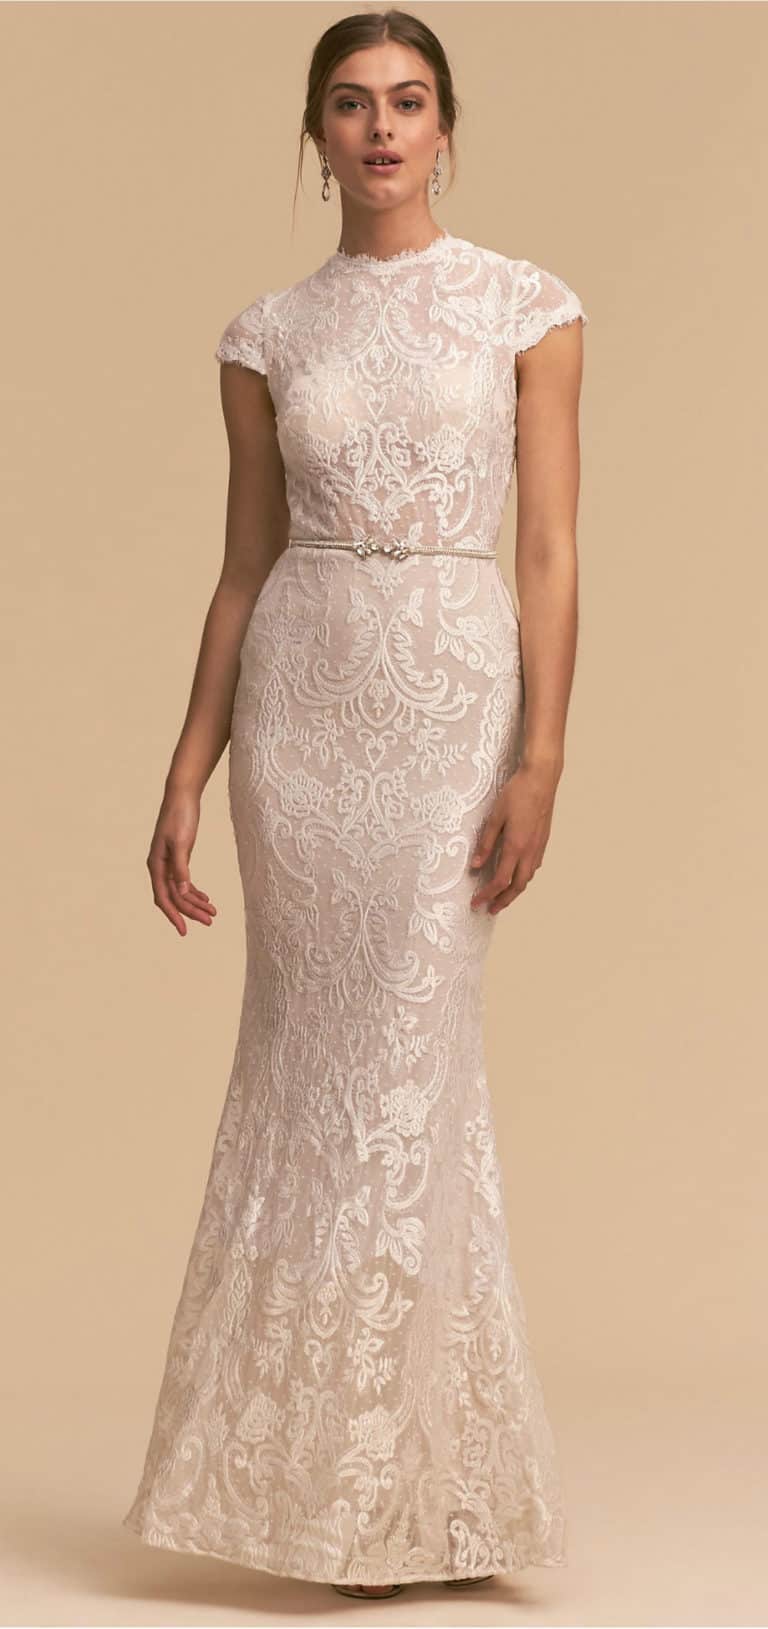 Ivory Lace Maxi Dress Dress For The Wedding 8088